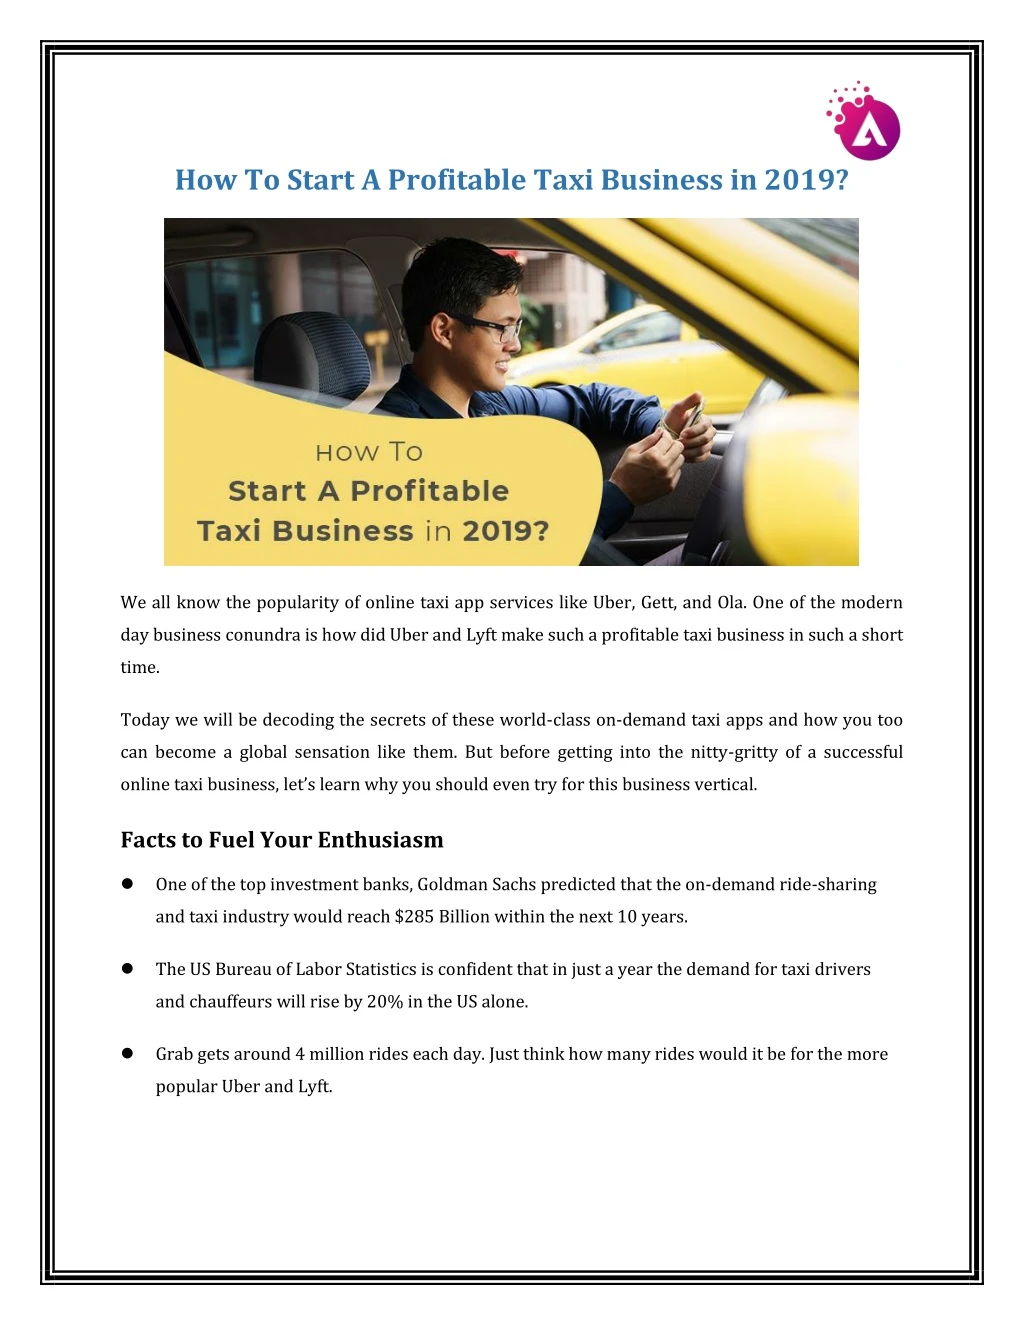 how to start a profitable taxi business in 2019